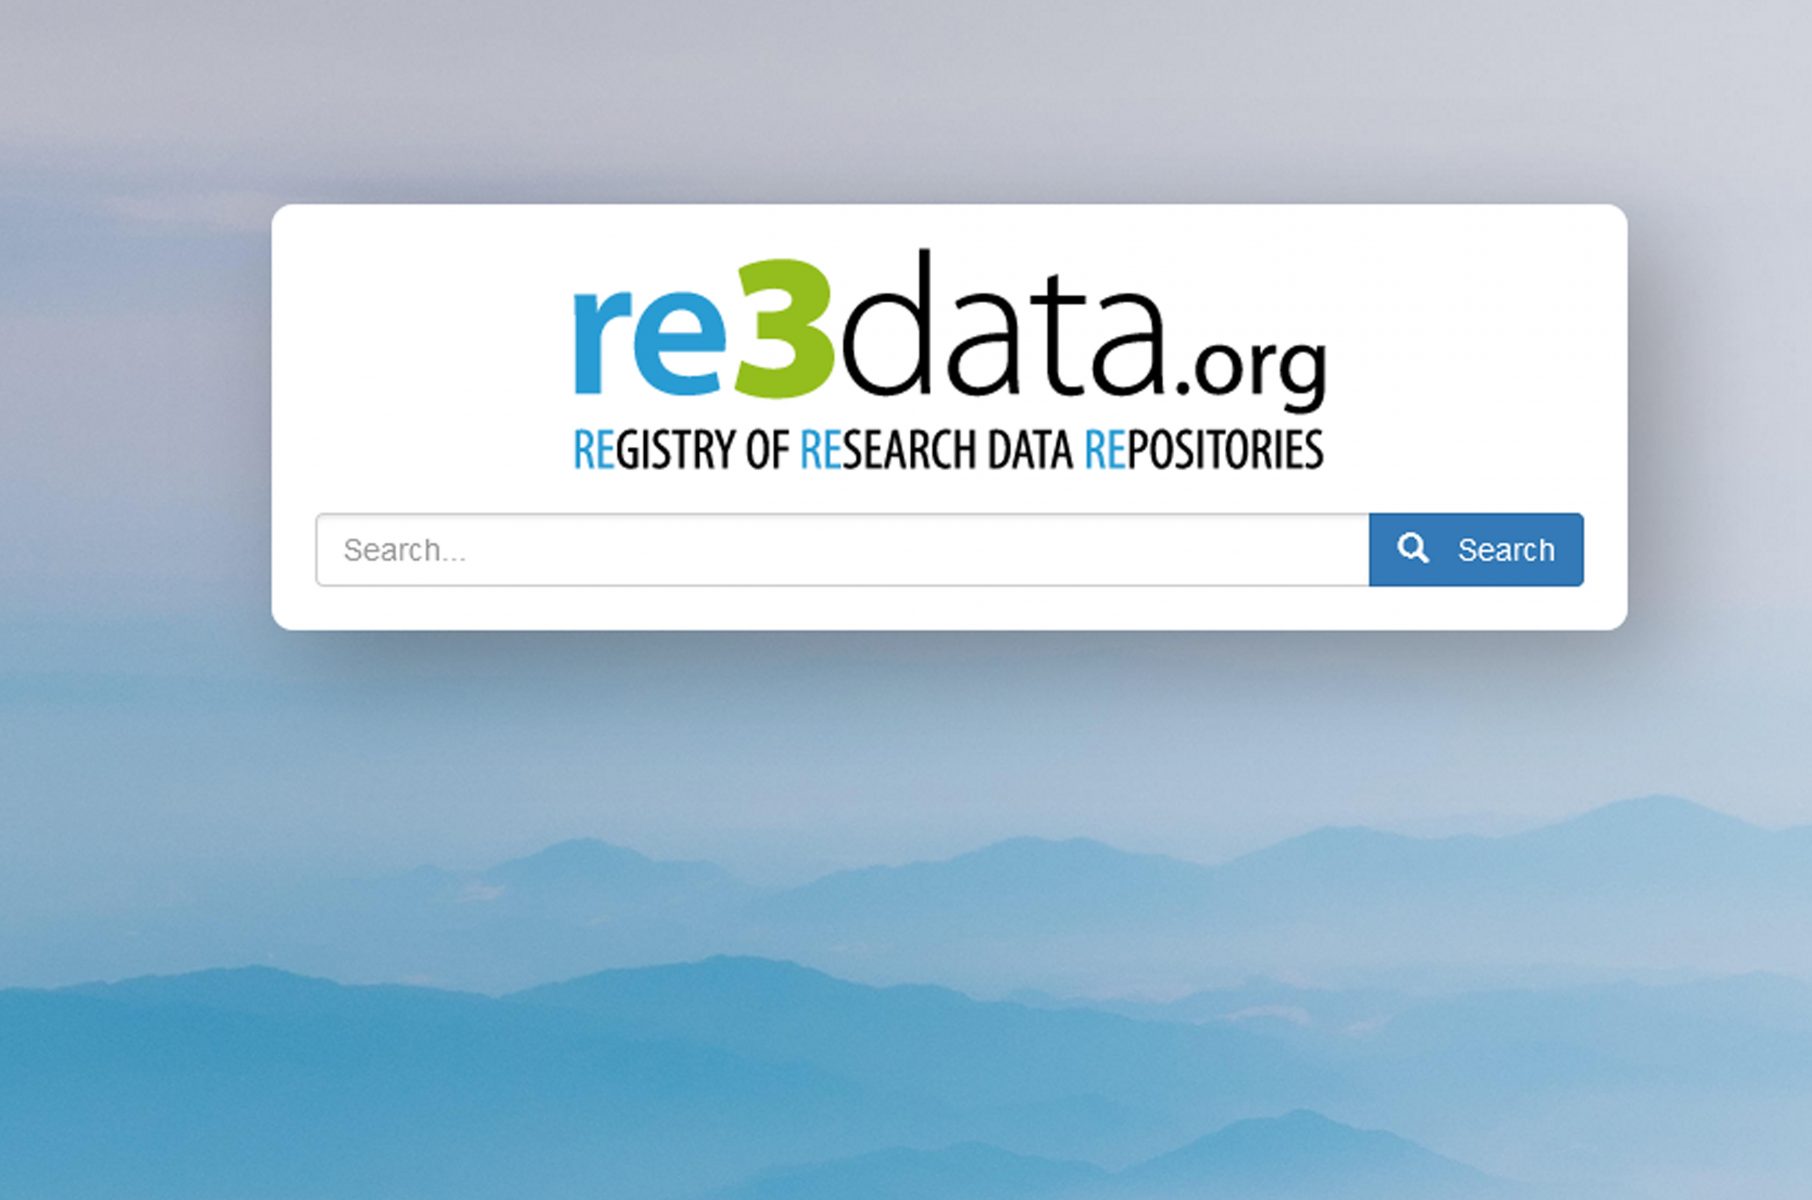 PPM in the registries of institutional/disciplinary and research data repositories